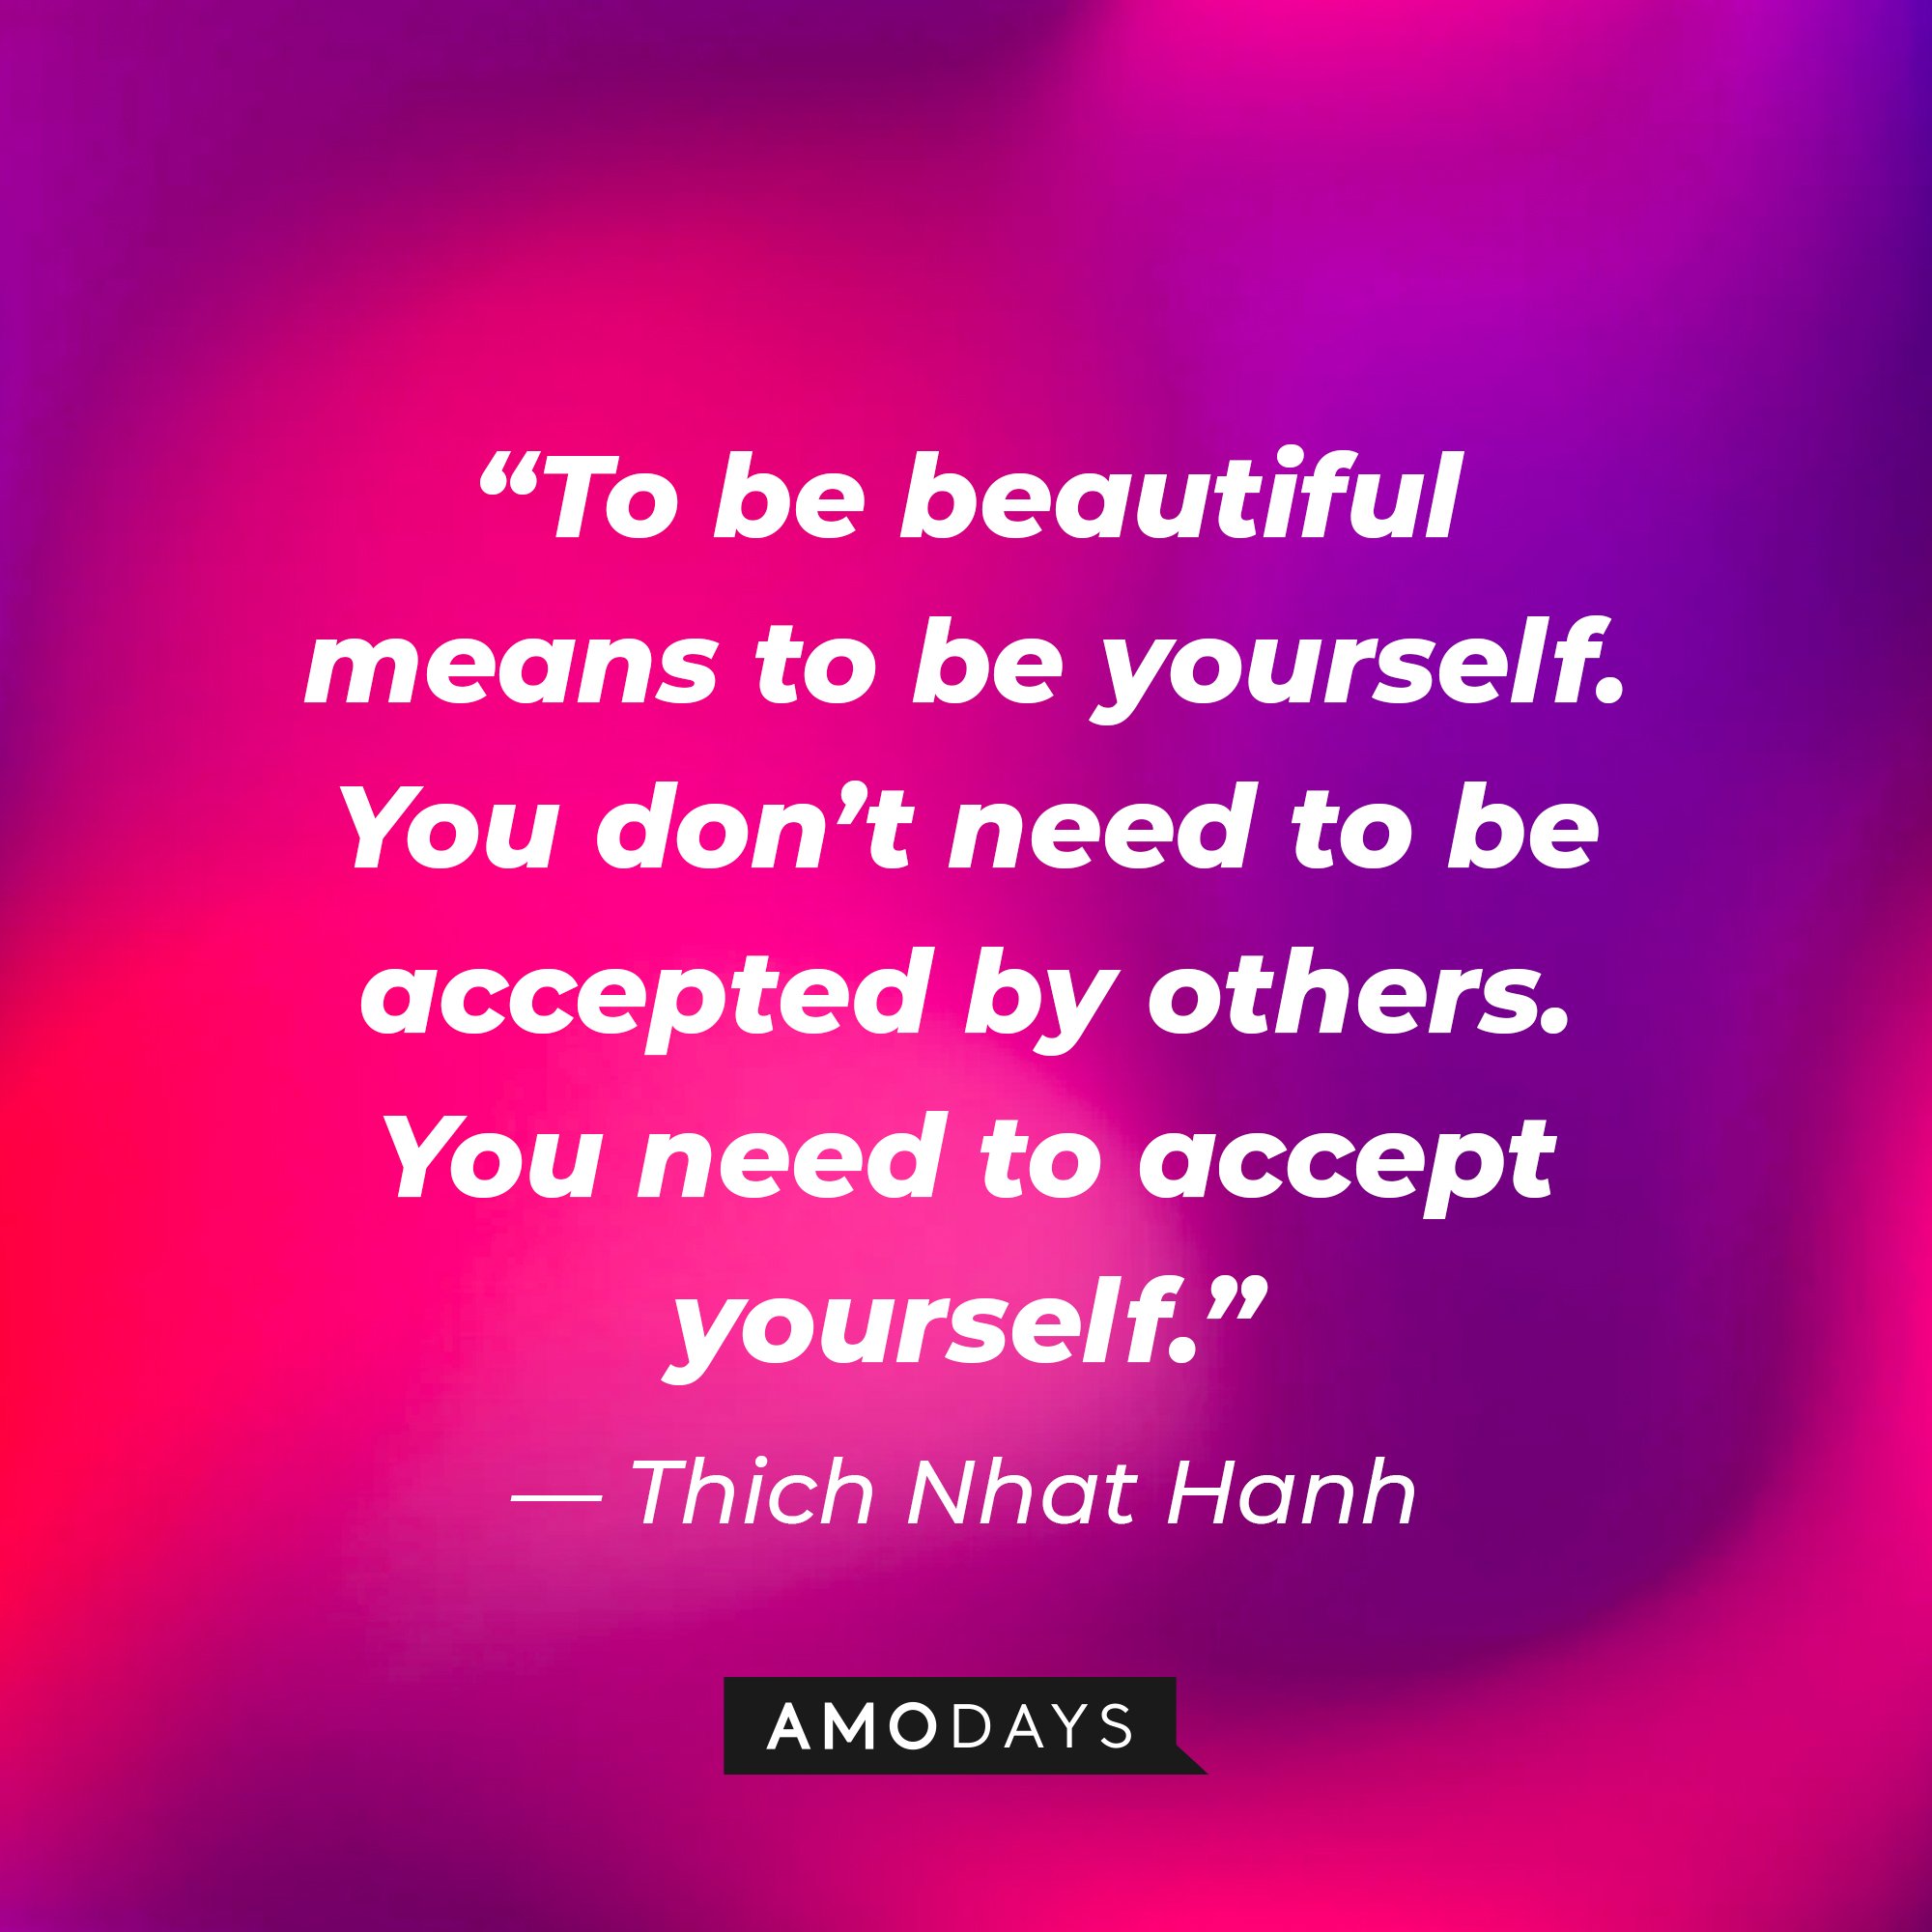 Thich Nhat Hanh’s’s quote: “To be beautiful means to be yourself. You don’t need to be accepted by others. You need to accept yourself.” | Image: AmoDays